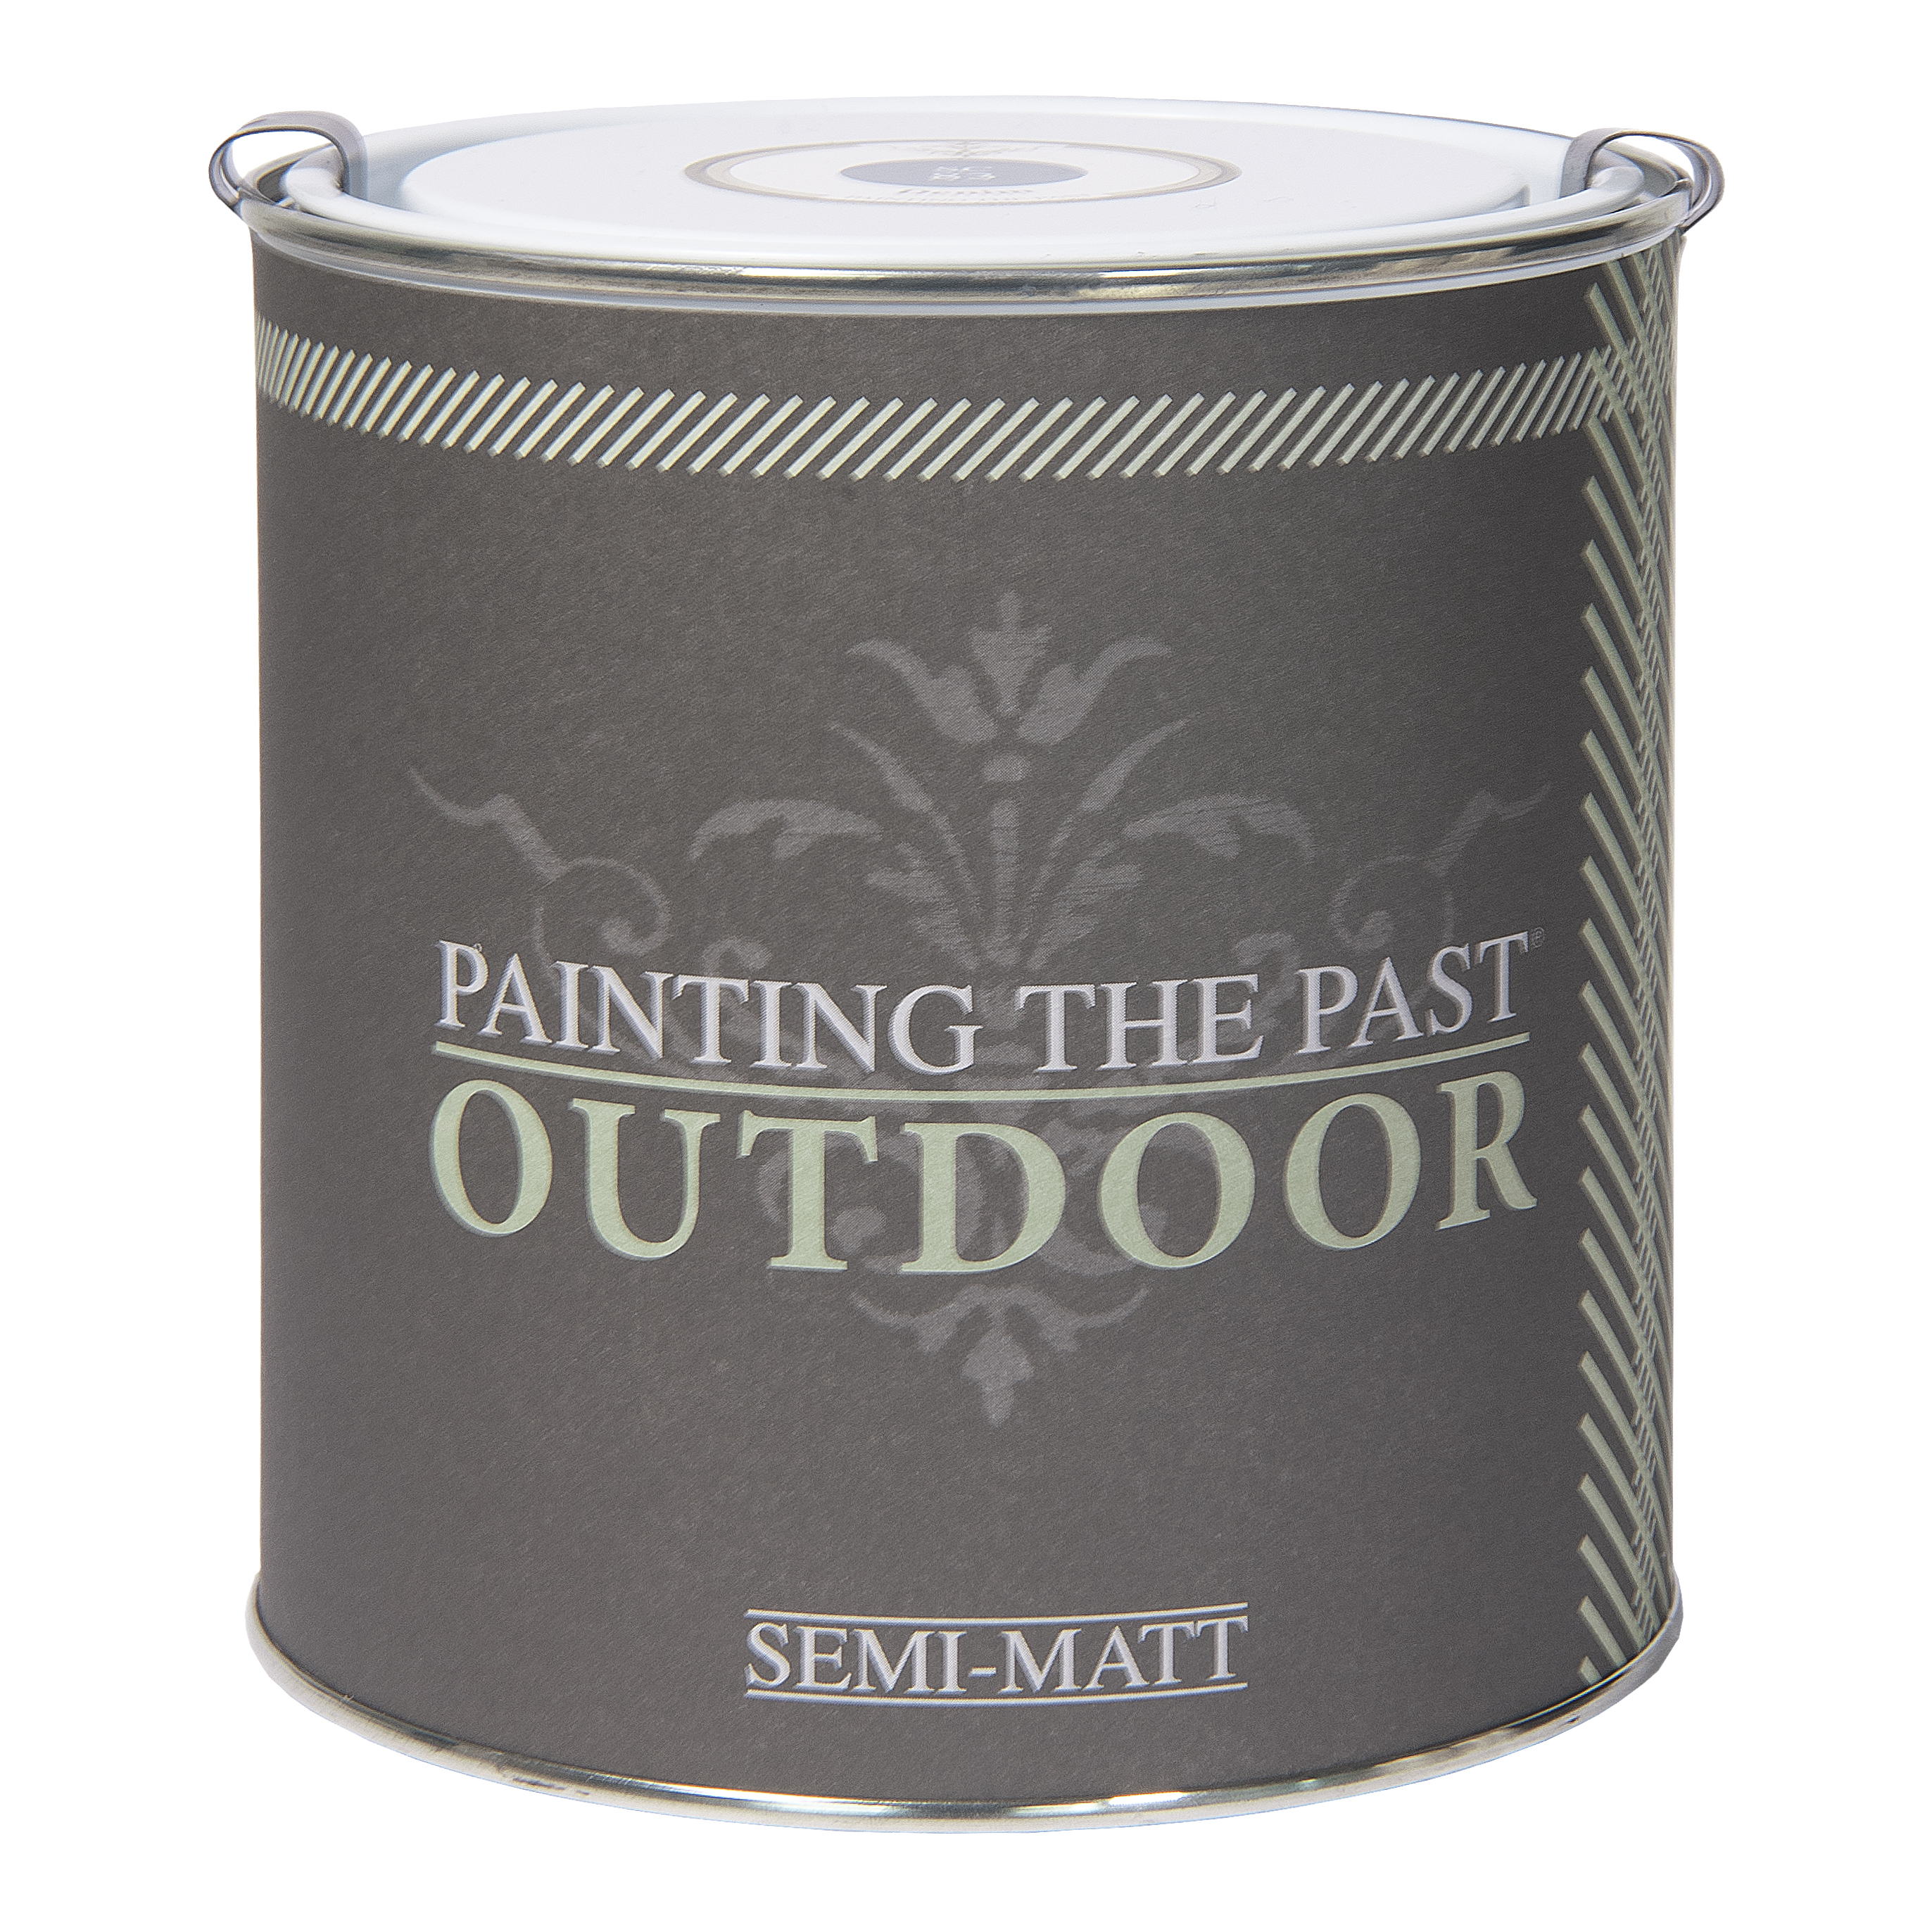 Painting The Past Outdoor Old White